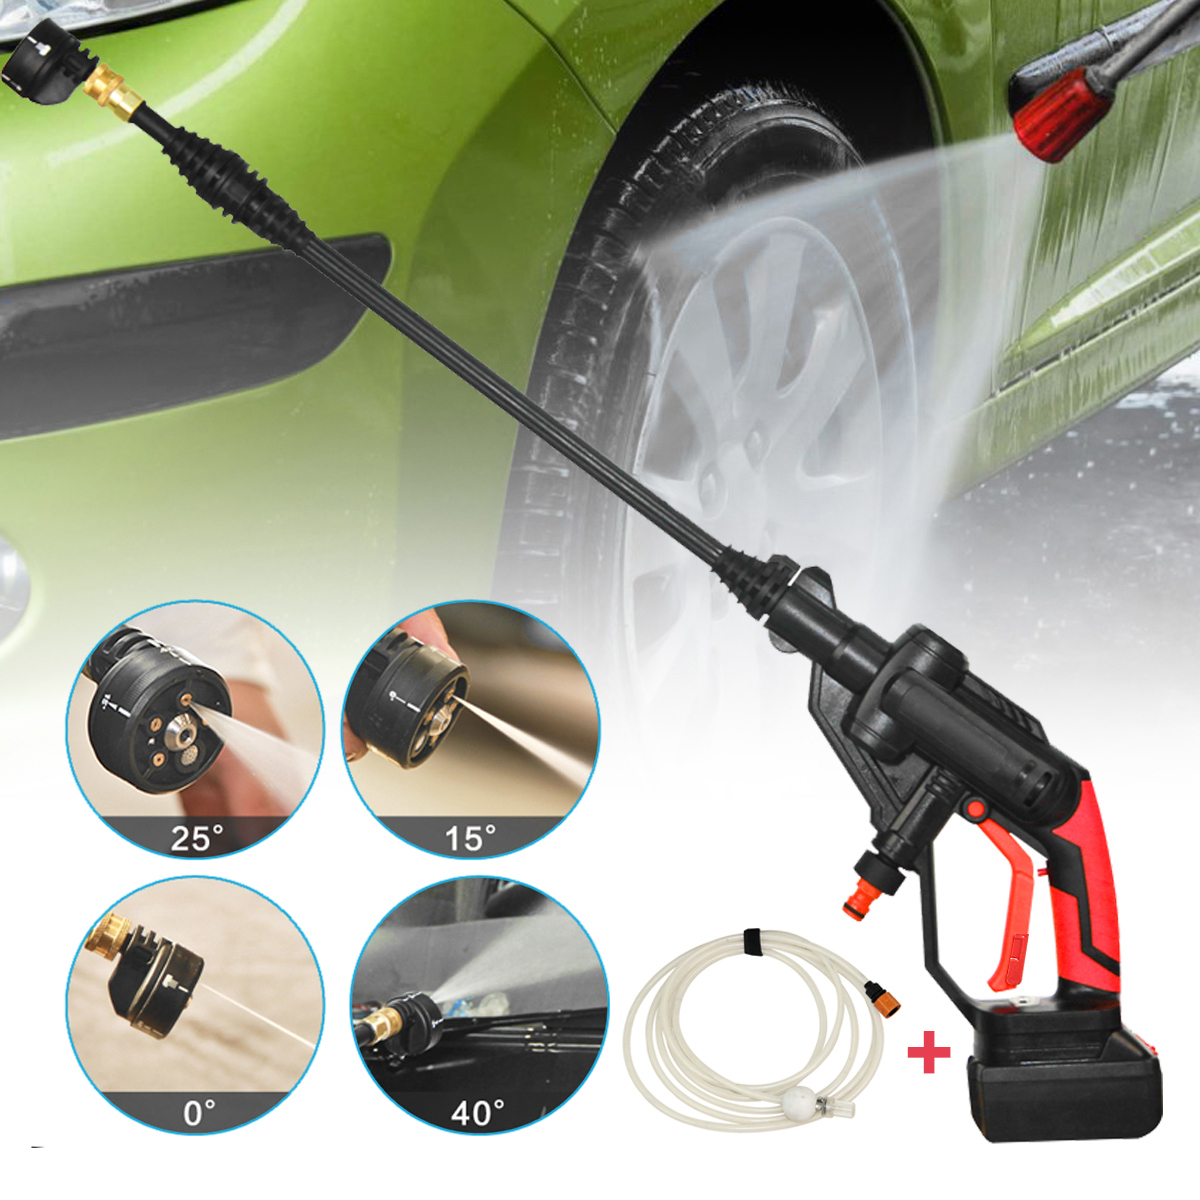 Multifunctional Cordless Pressure Cleaner Washer Gun Water Hose Nozzle Pump with Battery 14